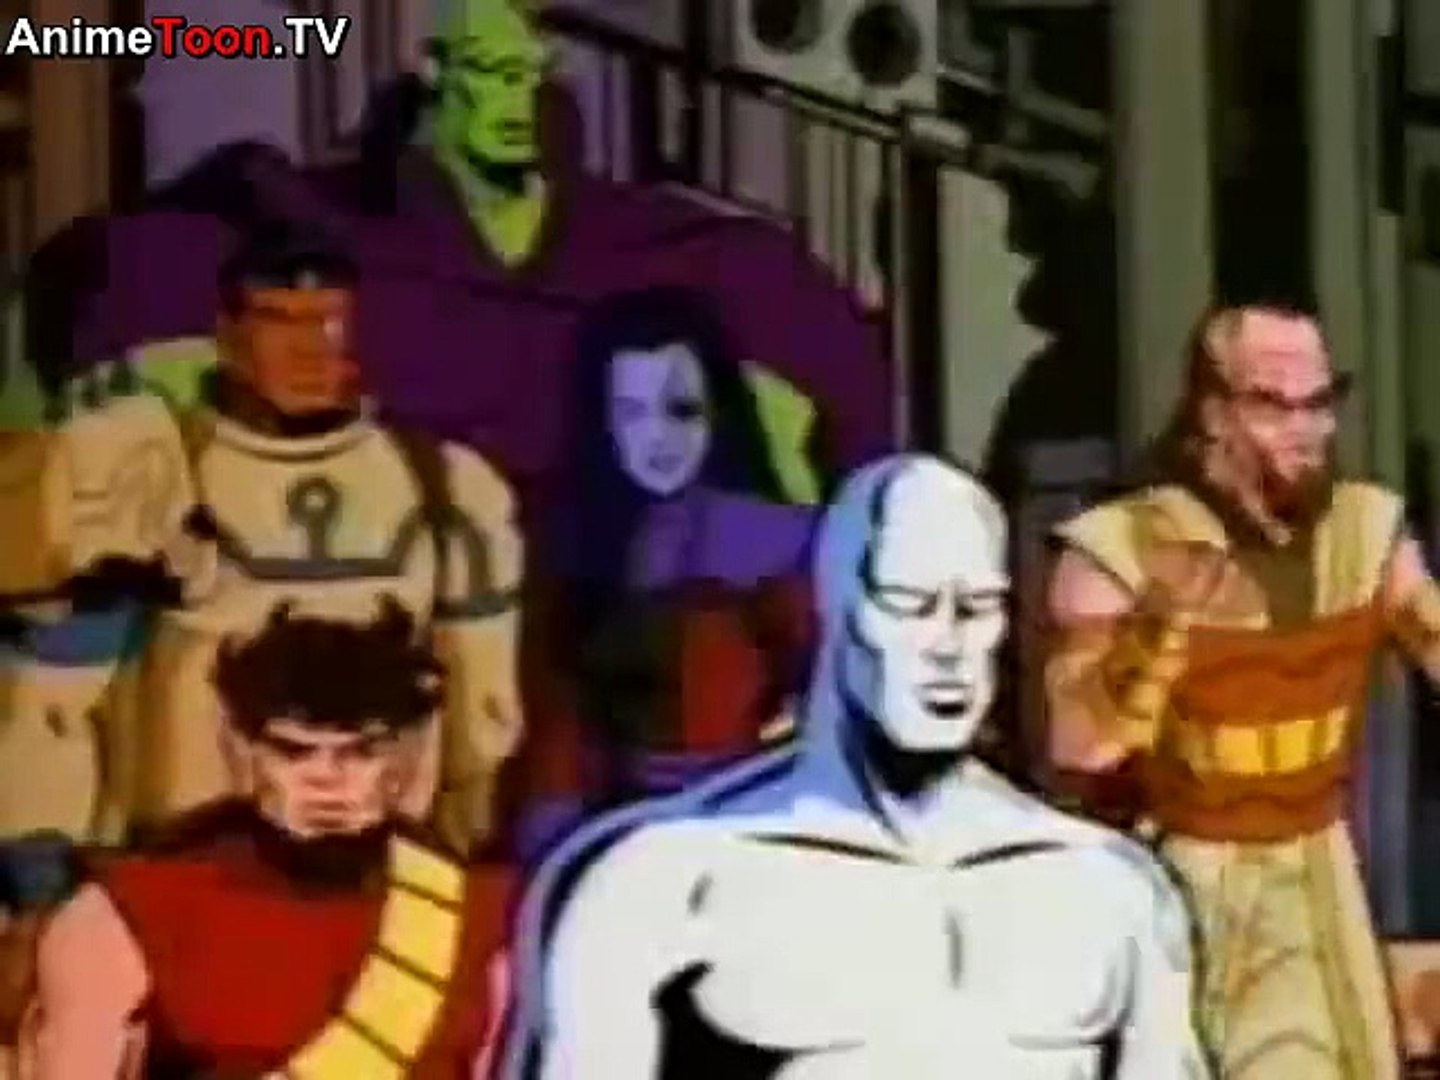 Silver Surfer Episode 2 [Full Episode] - Dailymotion Video